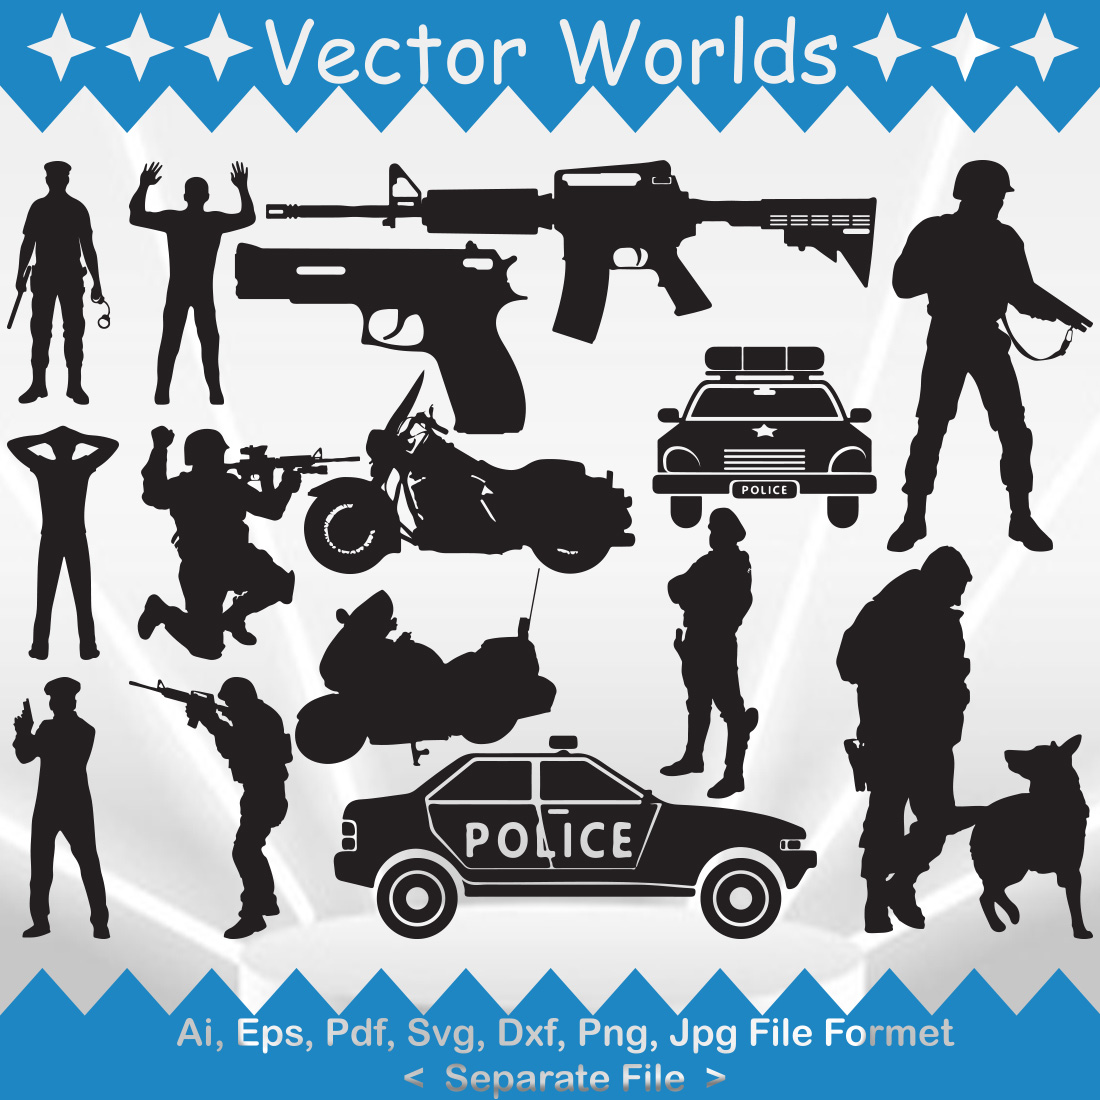 Police SVG Vector Design cover image.